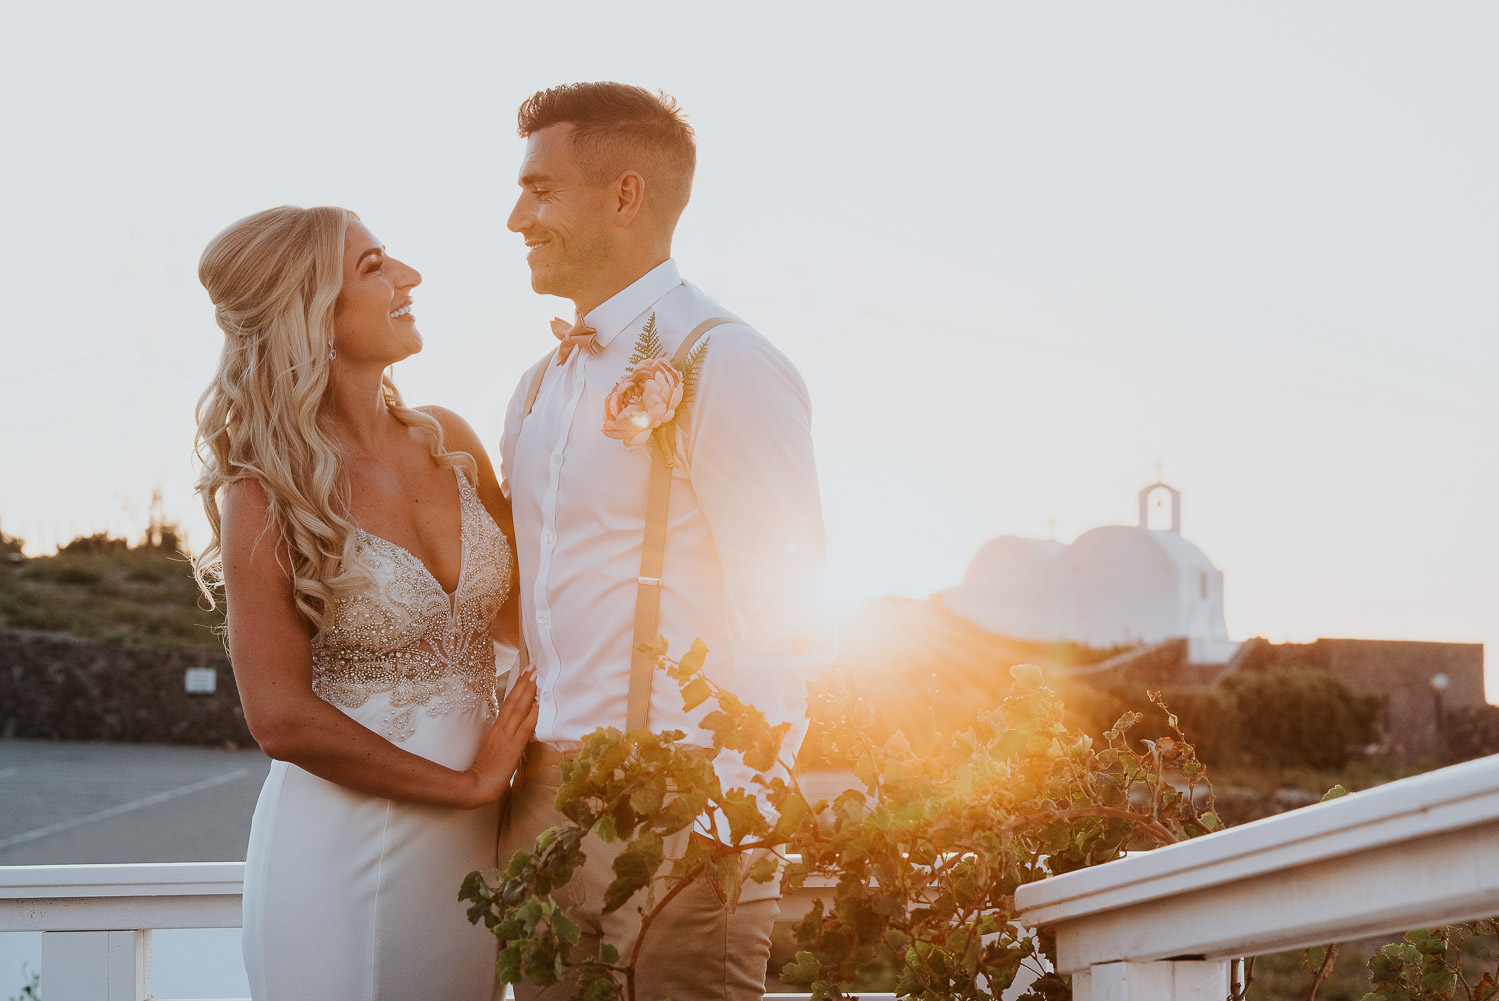 Wedding photographer Santorini: bride and groom embraced in the golden sunset light with a church in the background by Ben and Vesna.